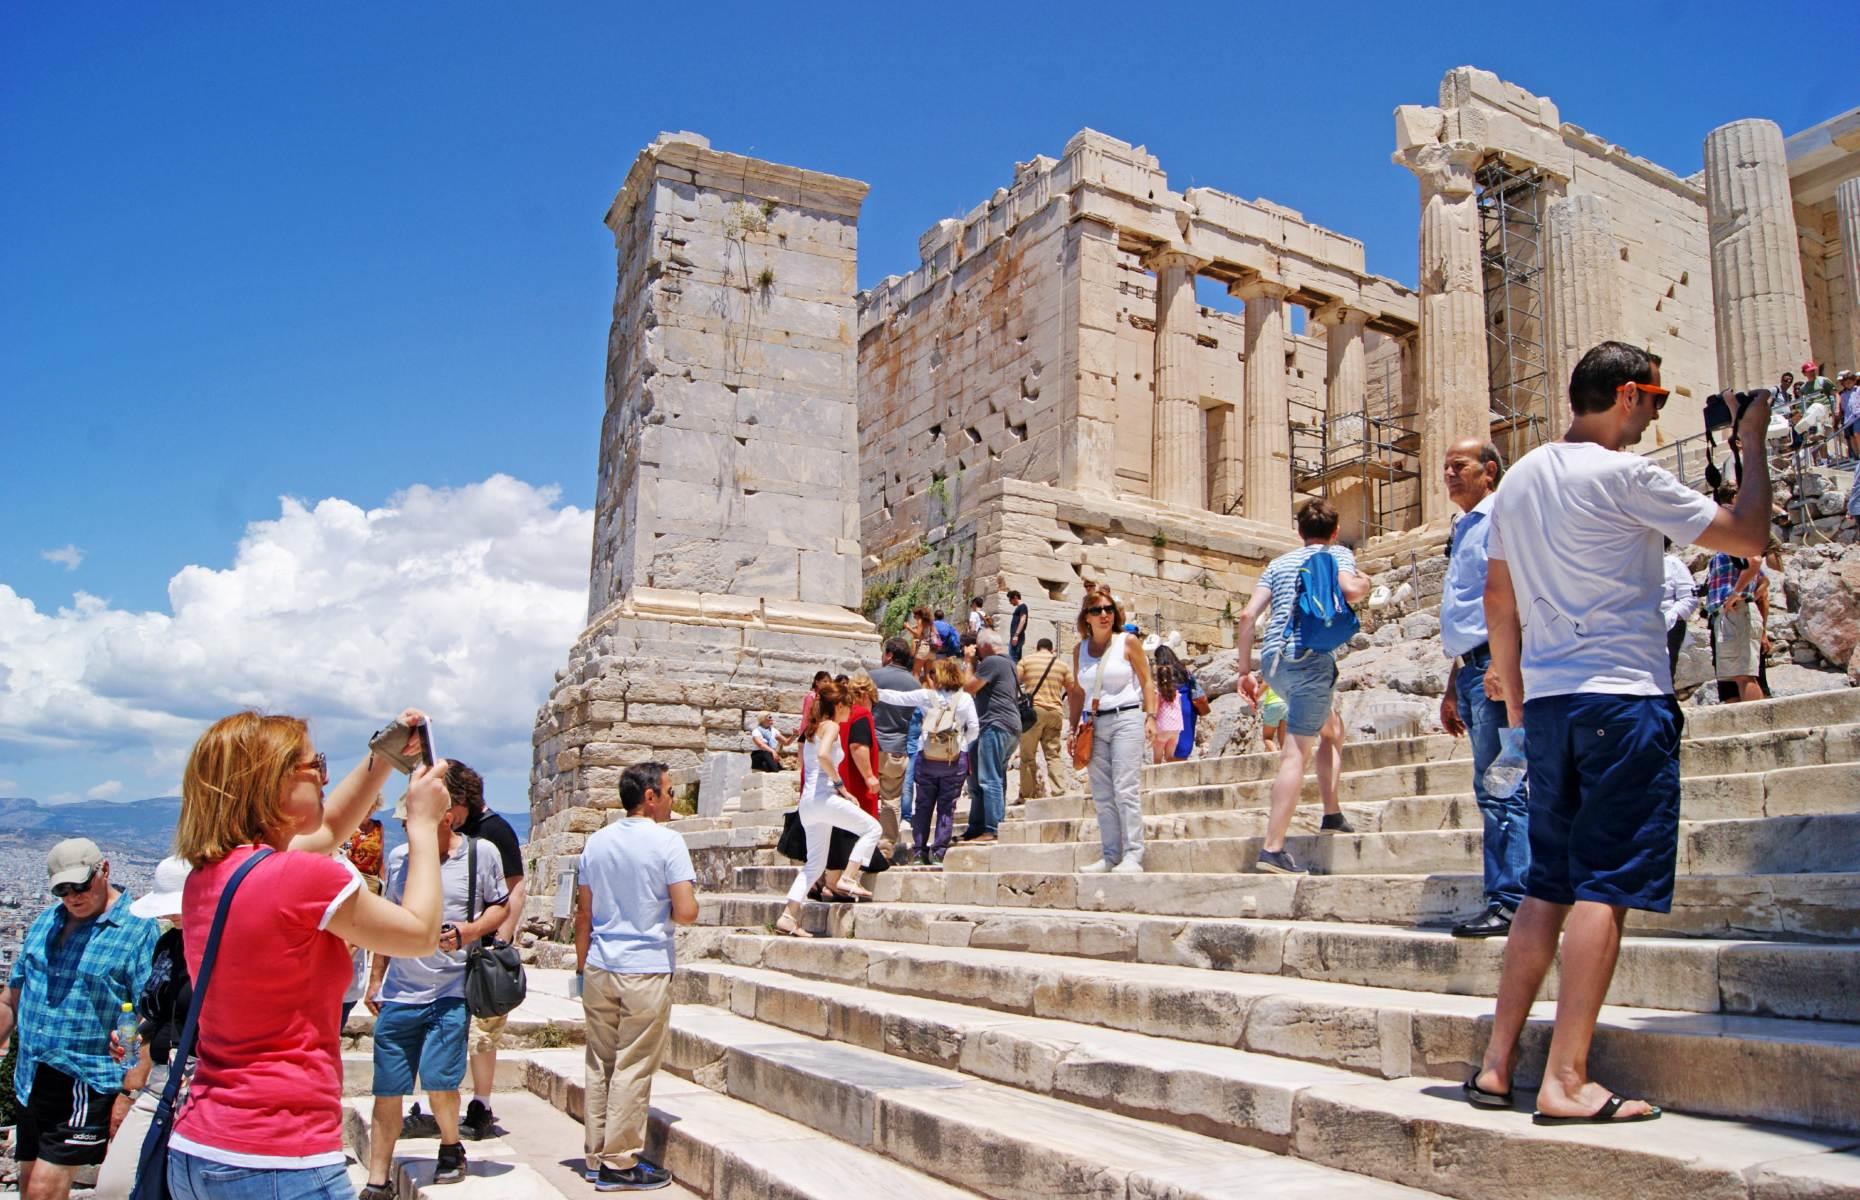 <p>Greece became the latest European country to impose visitor limits on one of its foremost attractions in 2023 when the Acropolis of Athens began capping the number of daily tourists at 20,000. To protect the longevity of the ancient UNESCO site and the comfort of everyone who wants to see it, visitors must book a one-hour entrance slot in advance. Elsewhere, tourism caps have also been applied on hire cars touring Italy’s Amalfi Coast Drive at busy periods – if your number plate ends in an odd number, you can’t access the road on odd-numbered days, and vice versa.</p>